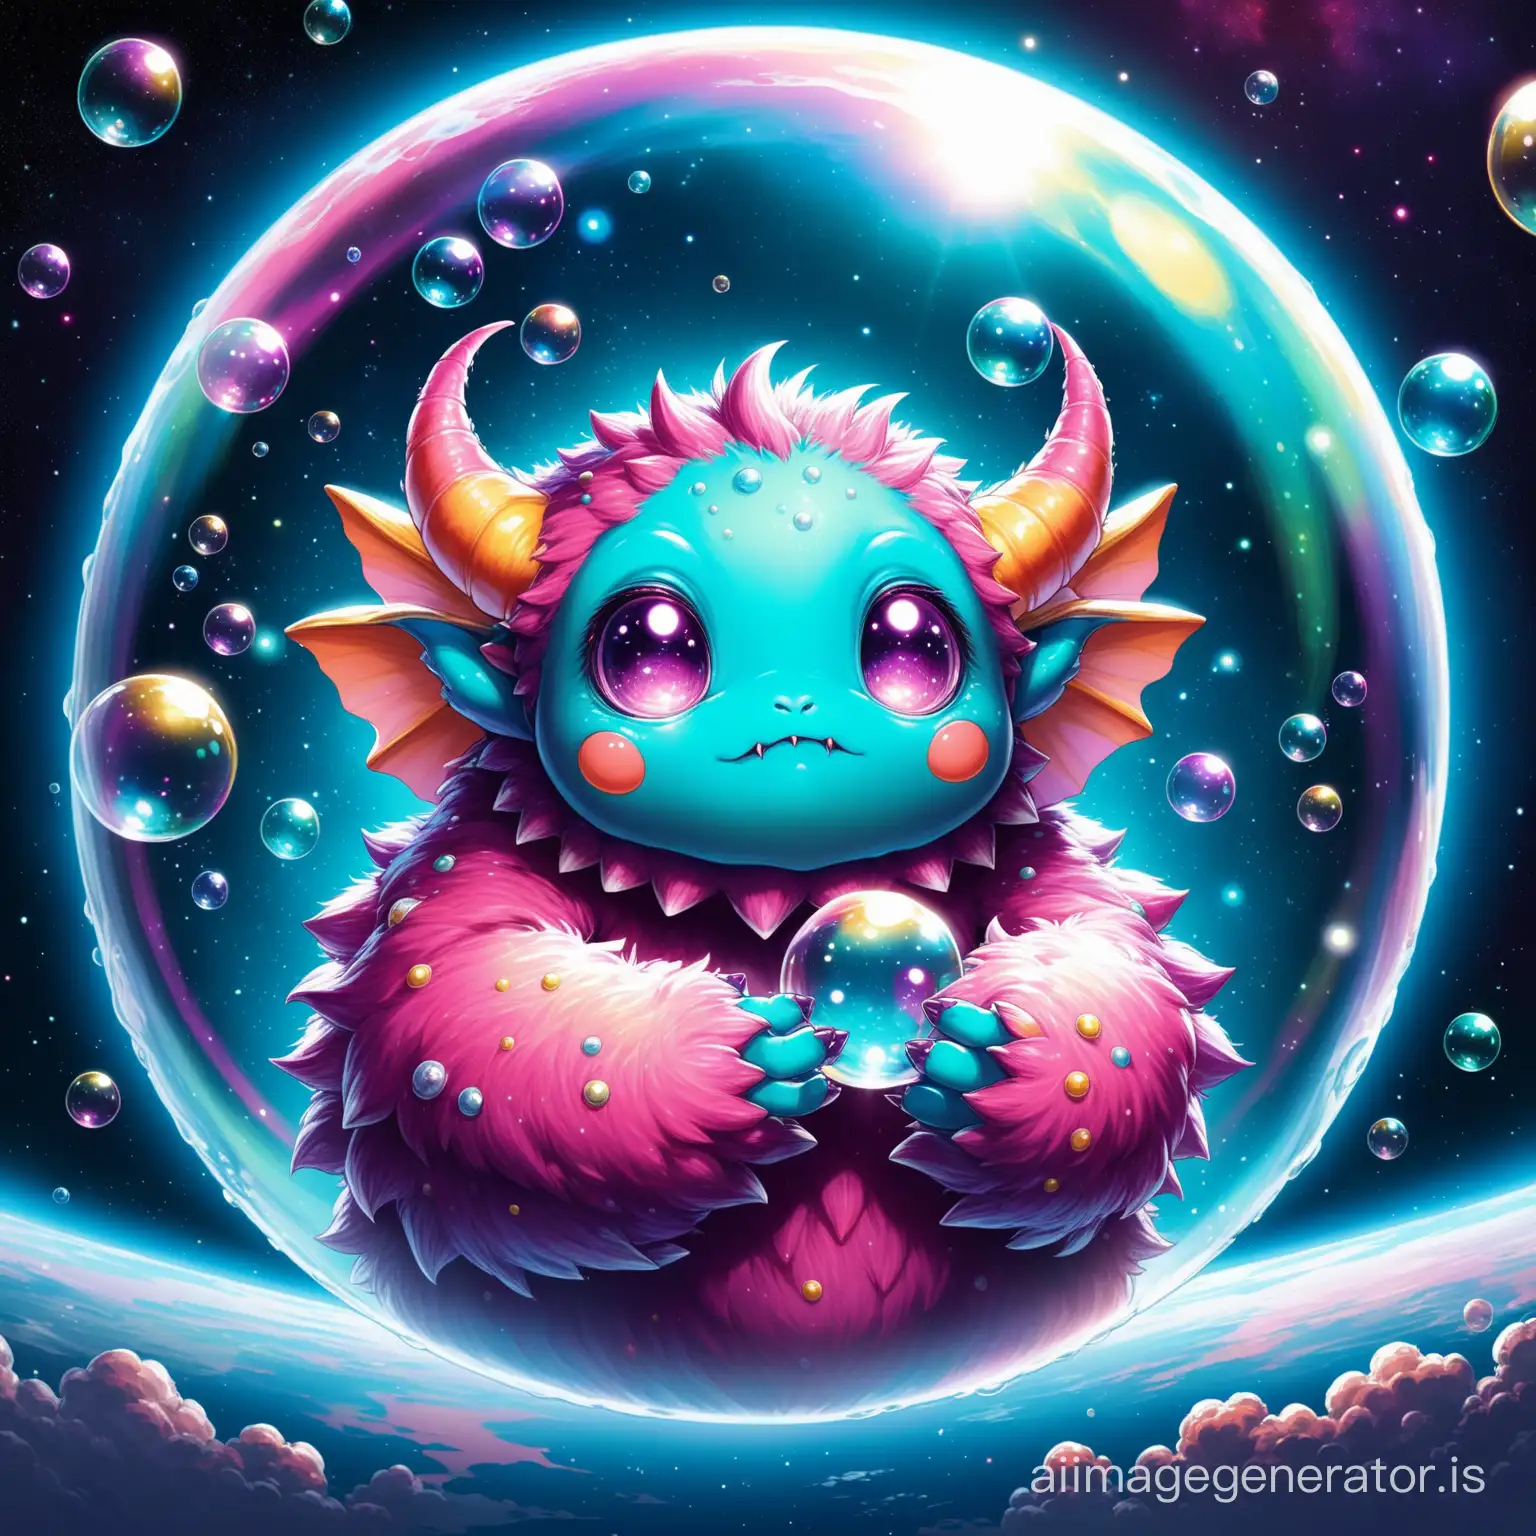 A baby monster holding a big bubble in his hands.
This monster child is in space
The details are beautifully evident